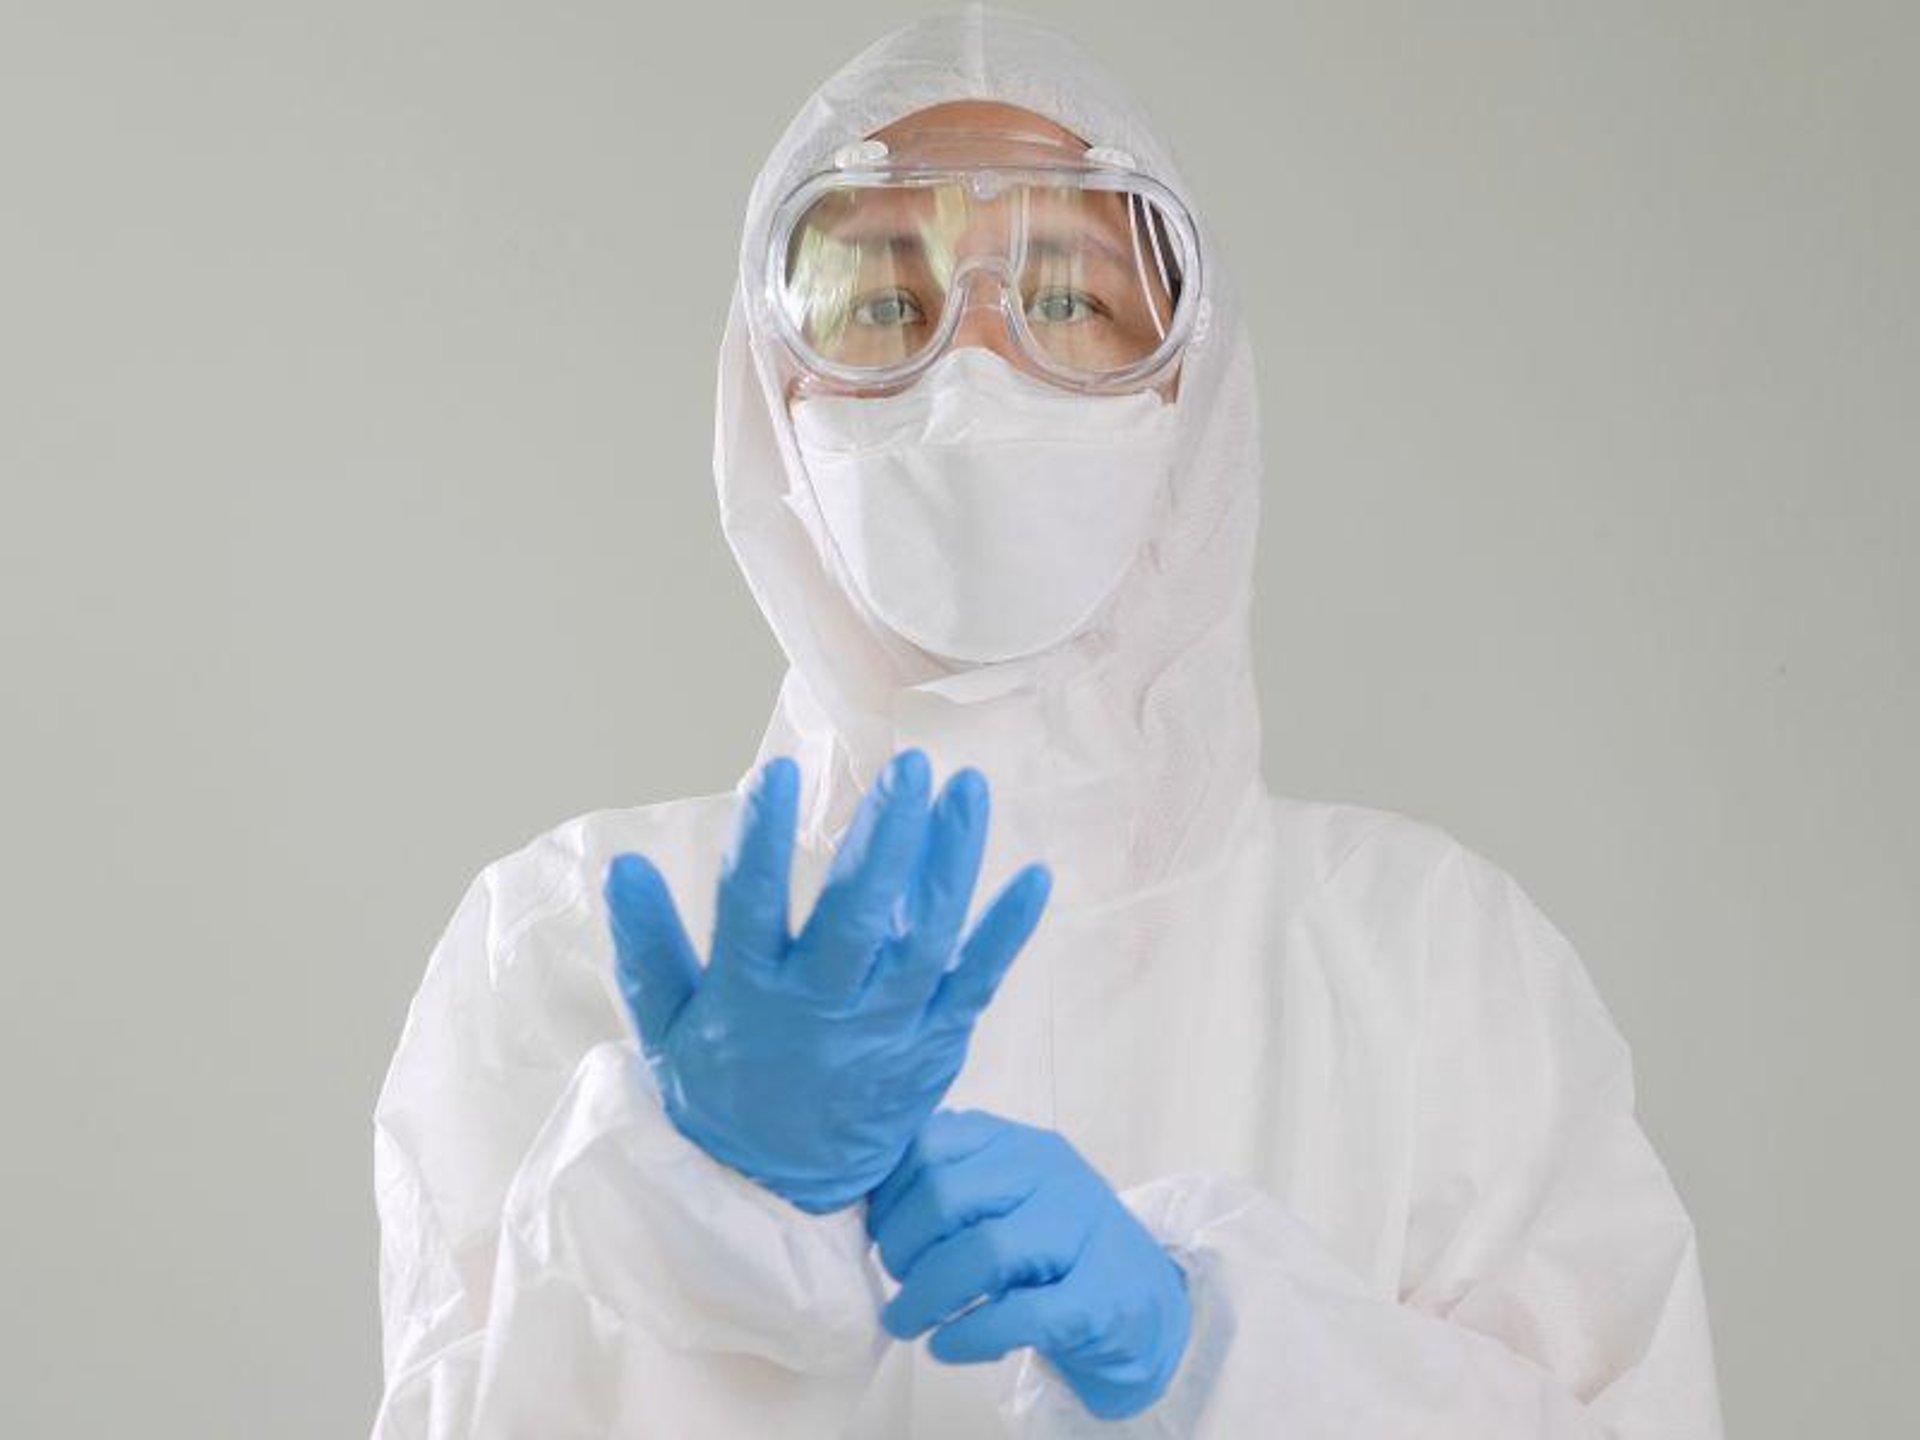 Kids Aren't Scared by Medical Workers' PPE, Study Finds thumbnail